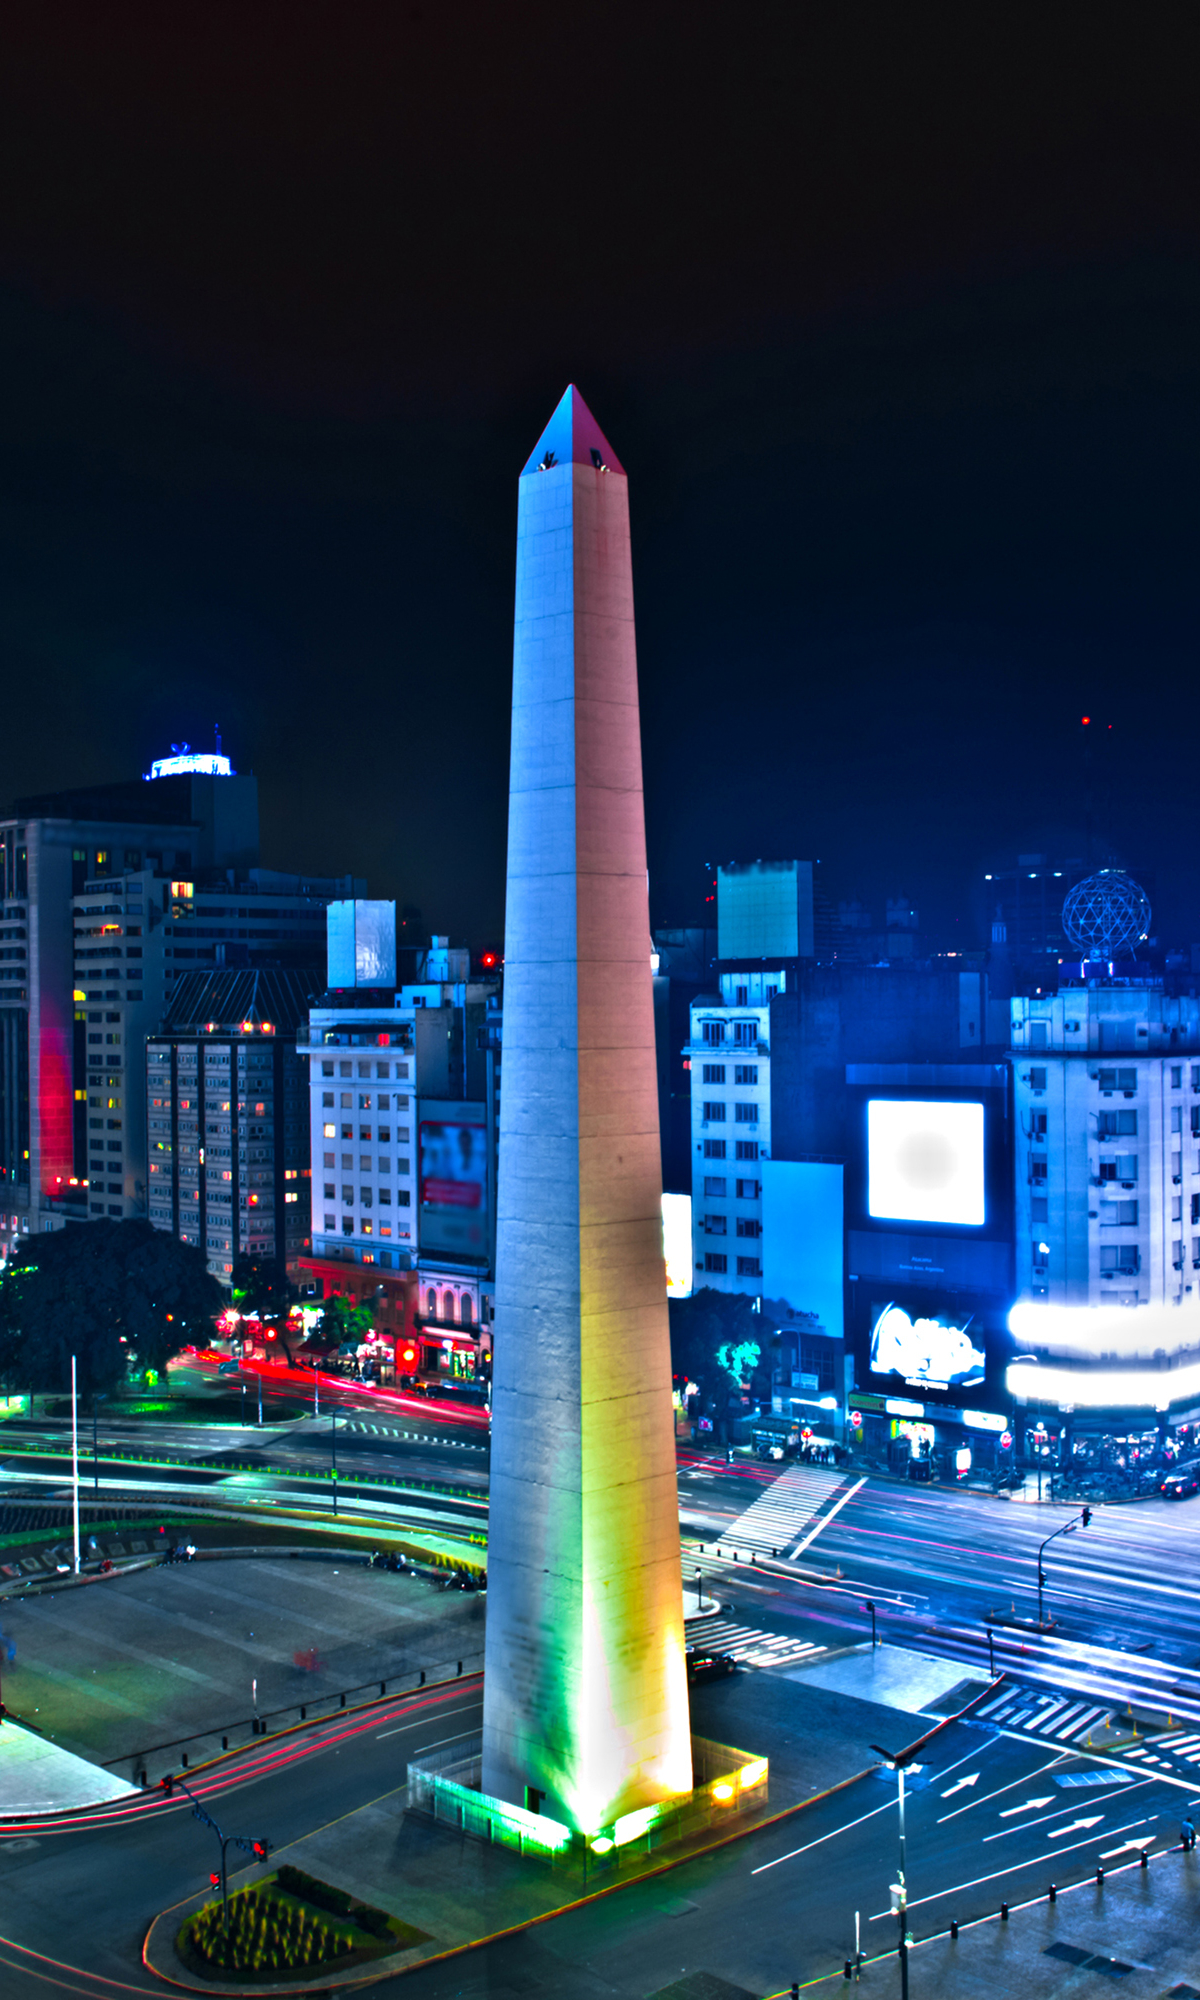 buenos aires, man made, time lapse, argentina, obelisk, building, night, cities